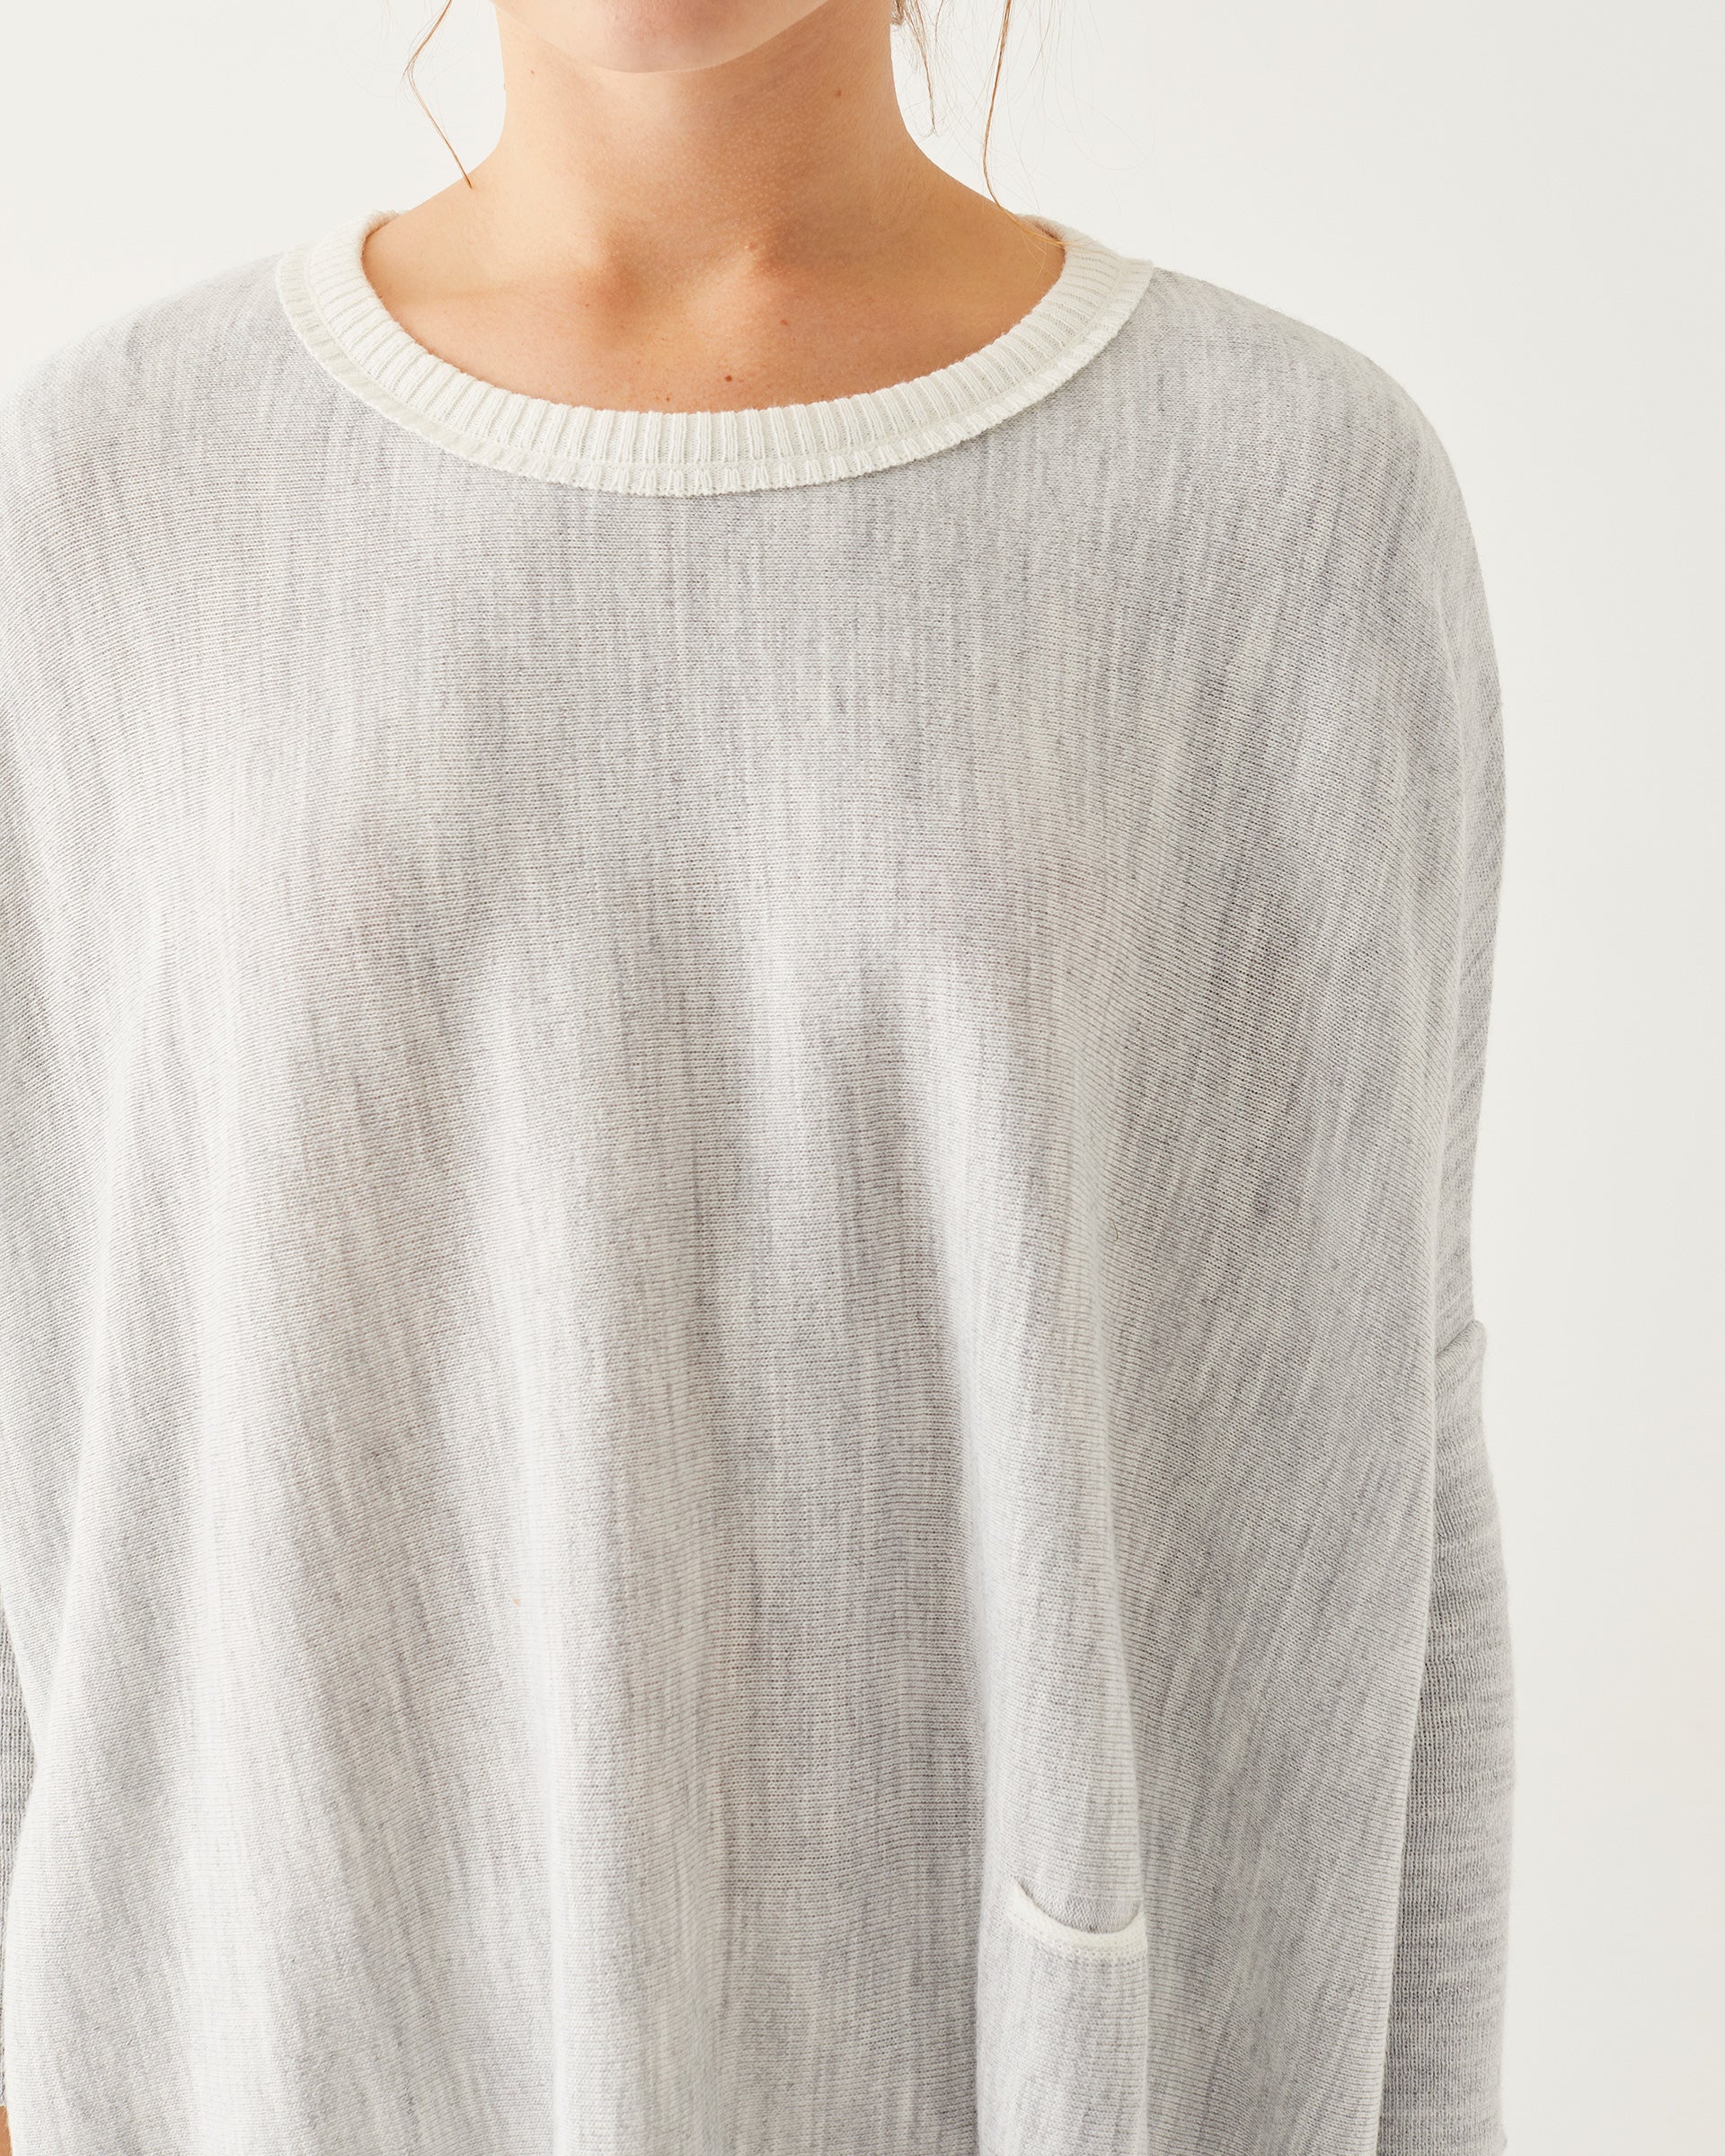 close up of female wearing grey and white sweater focused on crew neckline on a white background